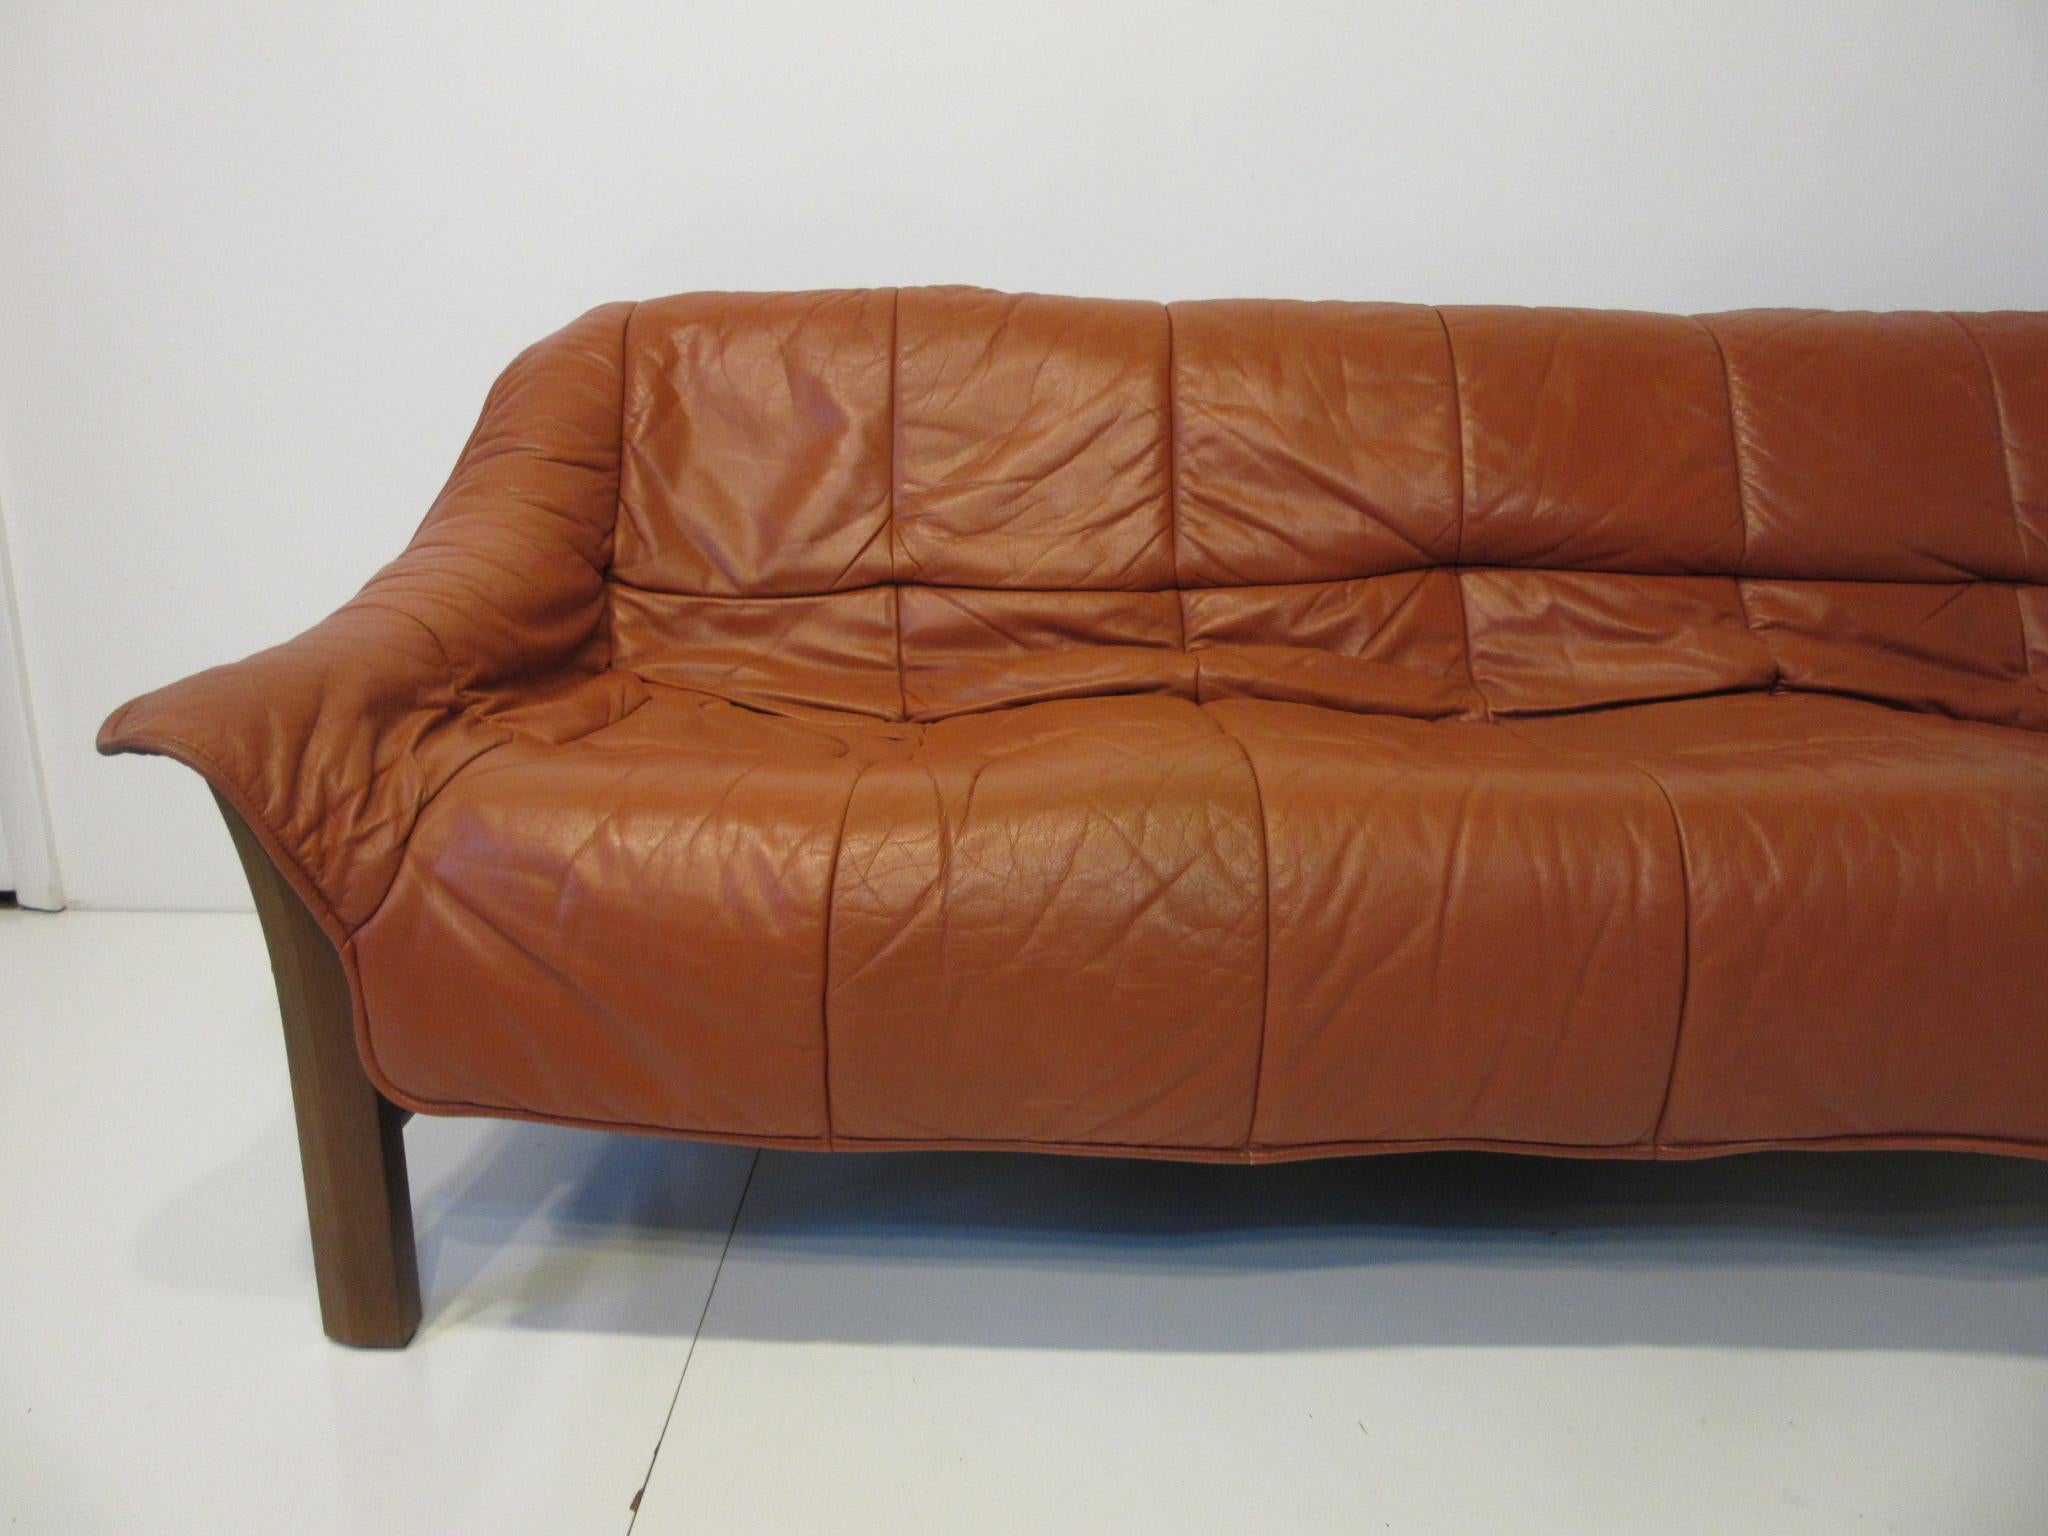 A leather sofa with a solid Jacaranda rosewood frame, this super comfortable piece is perfect for the living space that needs a rich but relaxed look. Well-made and with heavy leather which is great for long term wear manufactured in Brazil.